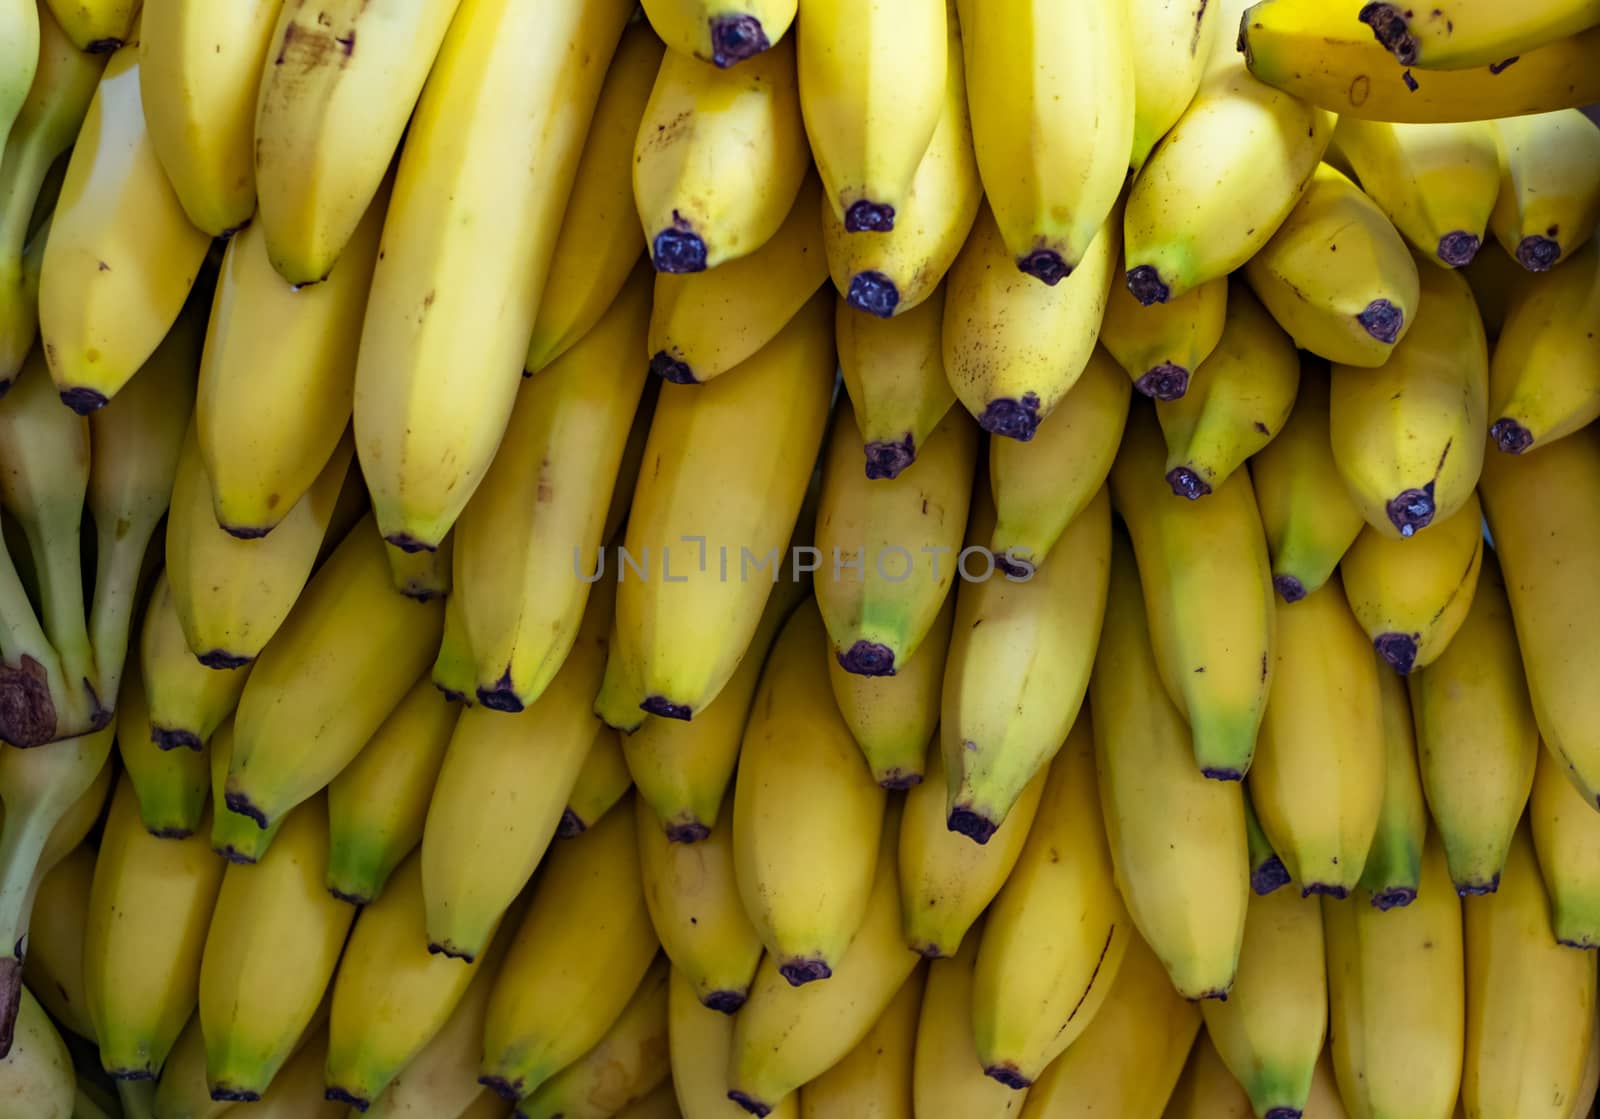 a bunch of bananas at the store